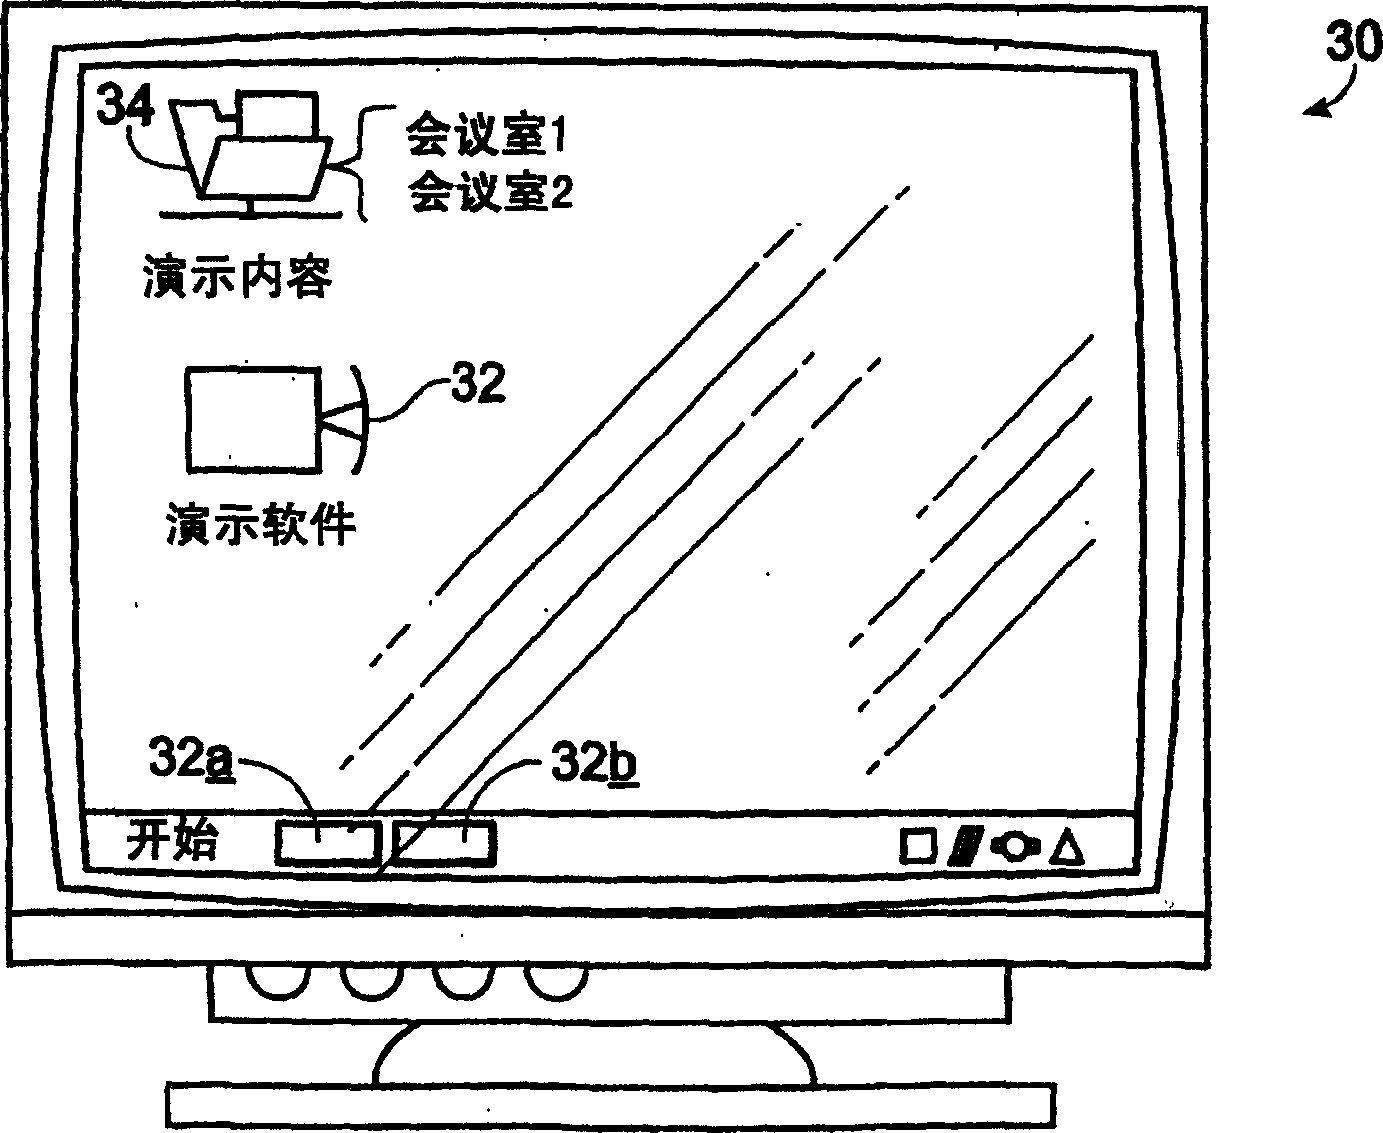 Network projector interface system